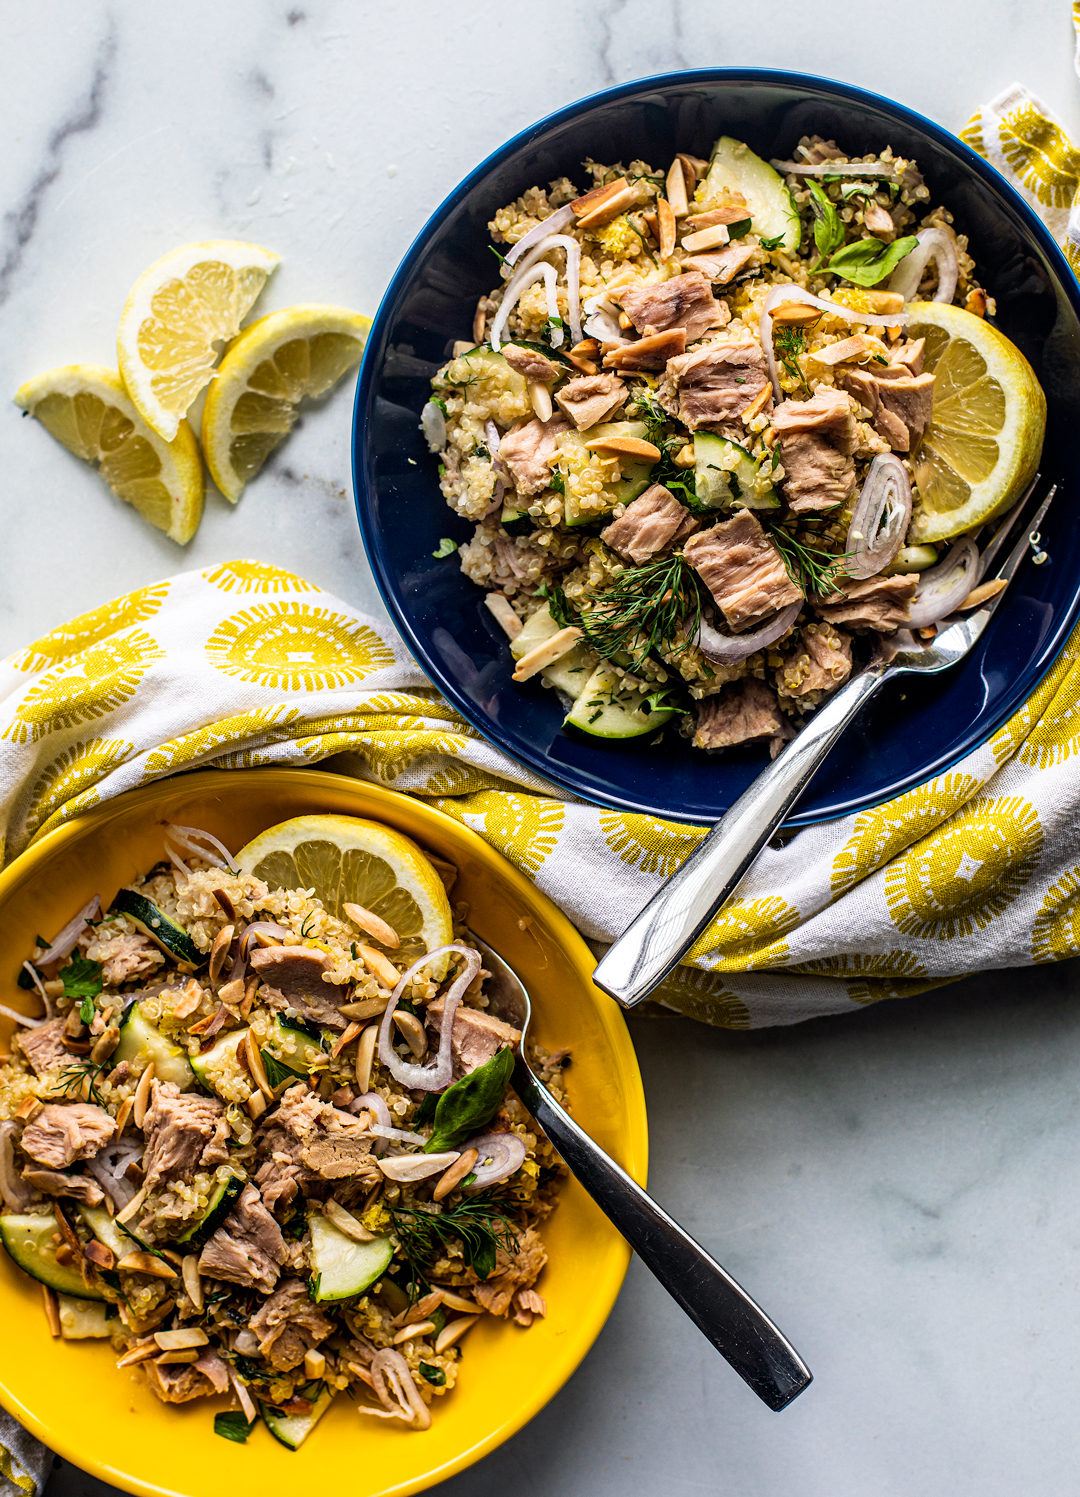 Two bowls of quinoa topped with large flakes of tuna and lemon wedges.